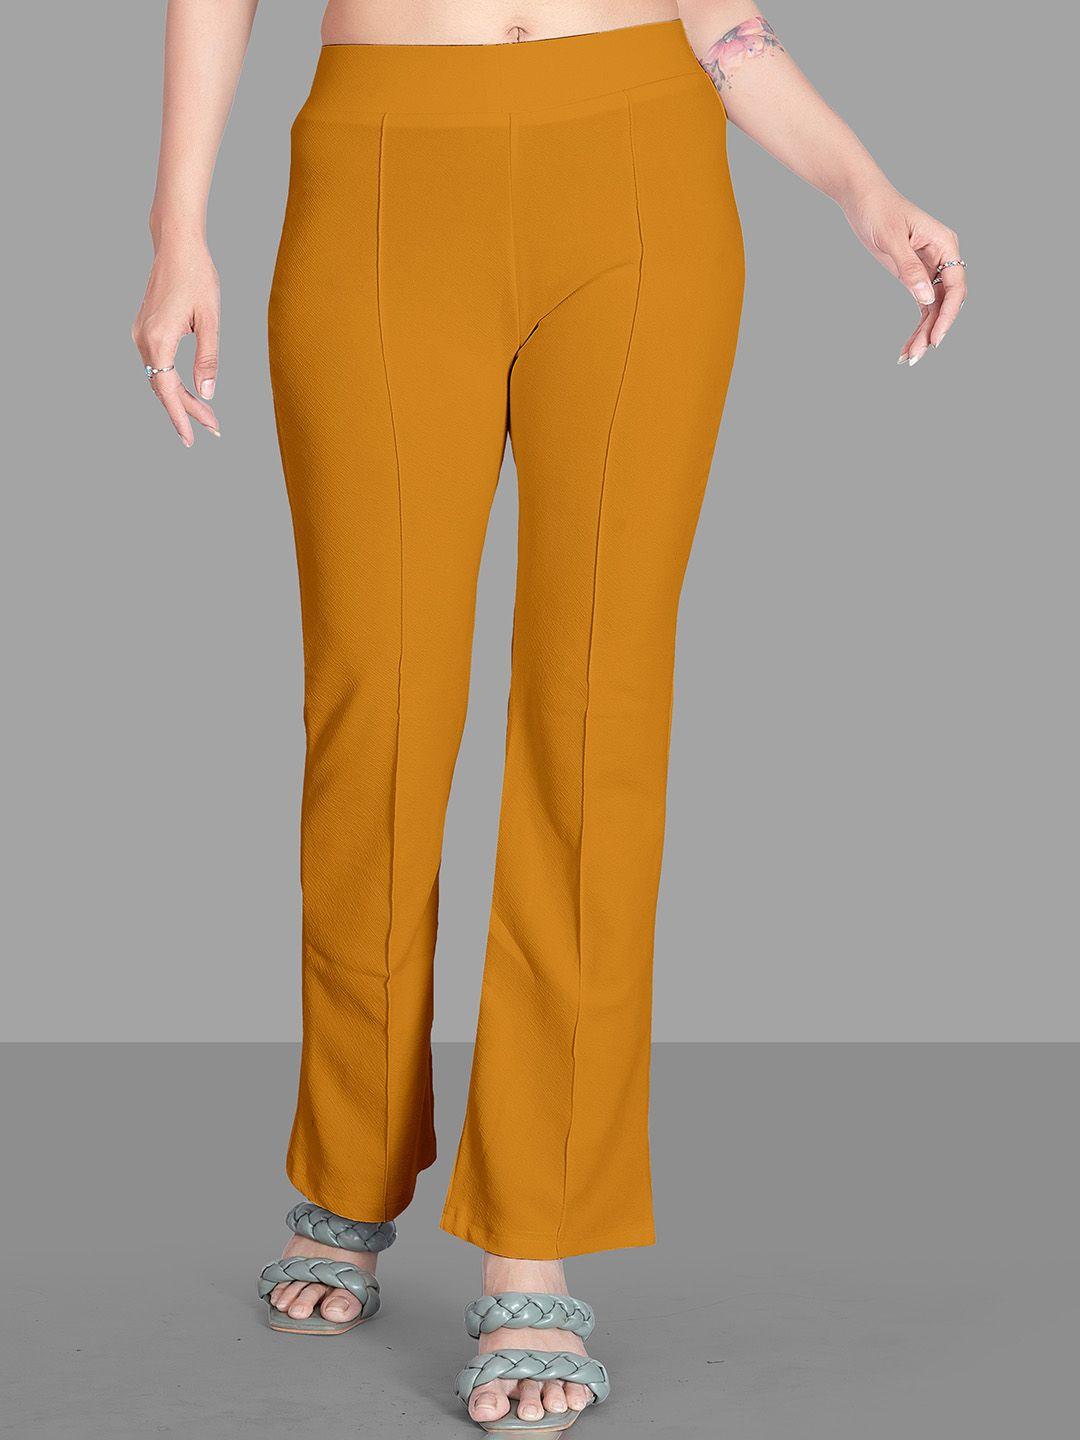 wuxi-women-relaxed-straight-leg-high-rise-easy-wash-trousers